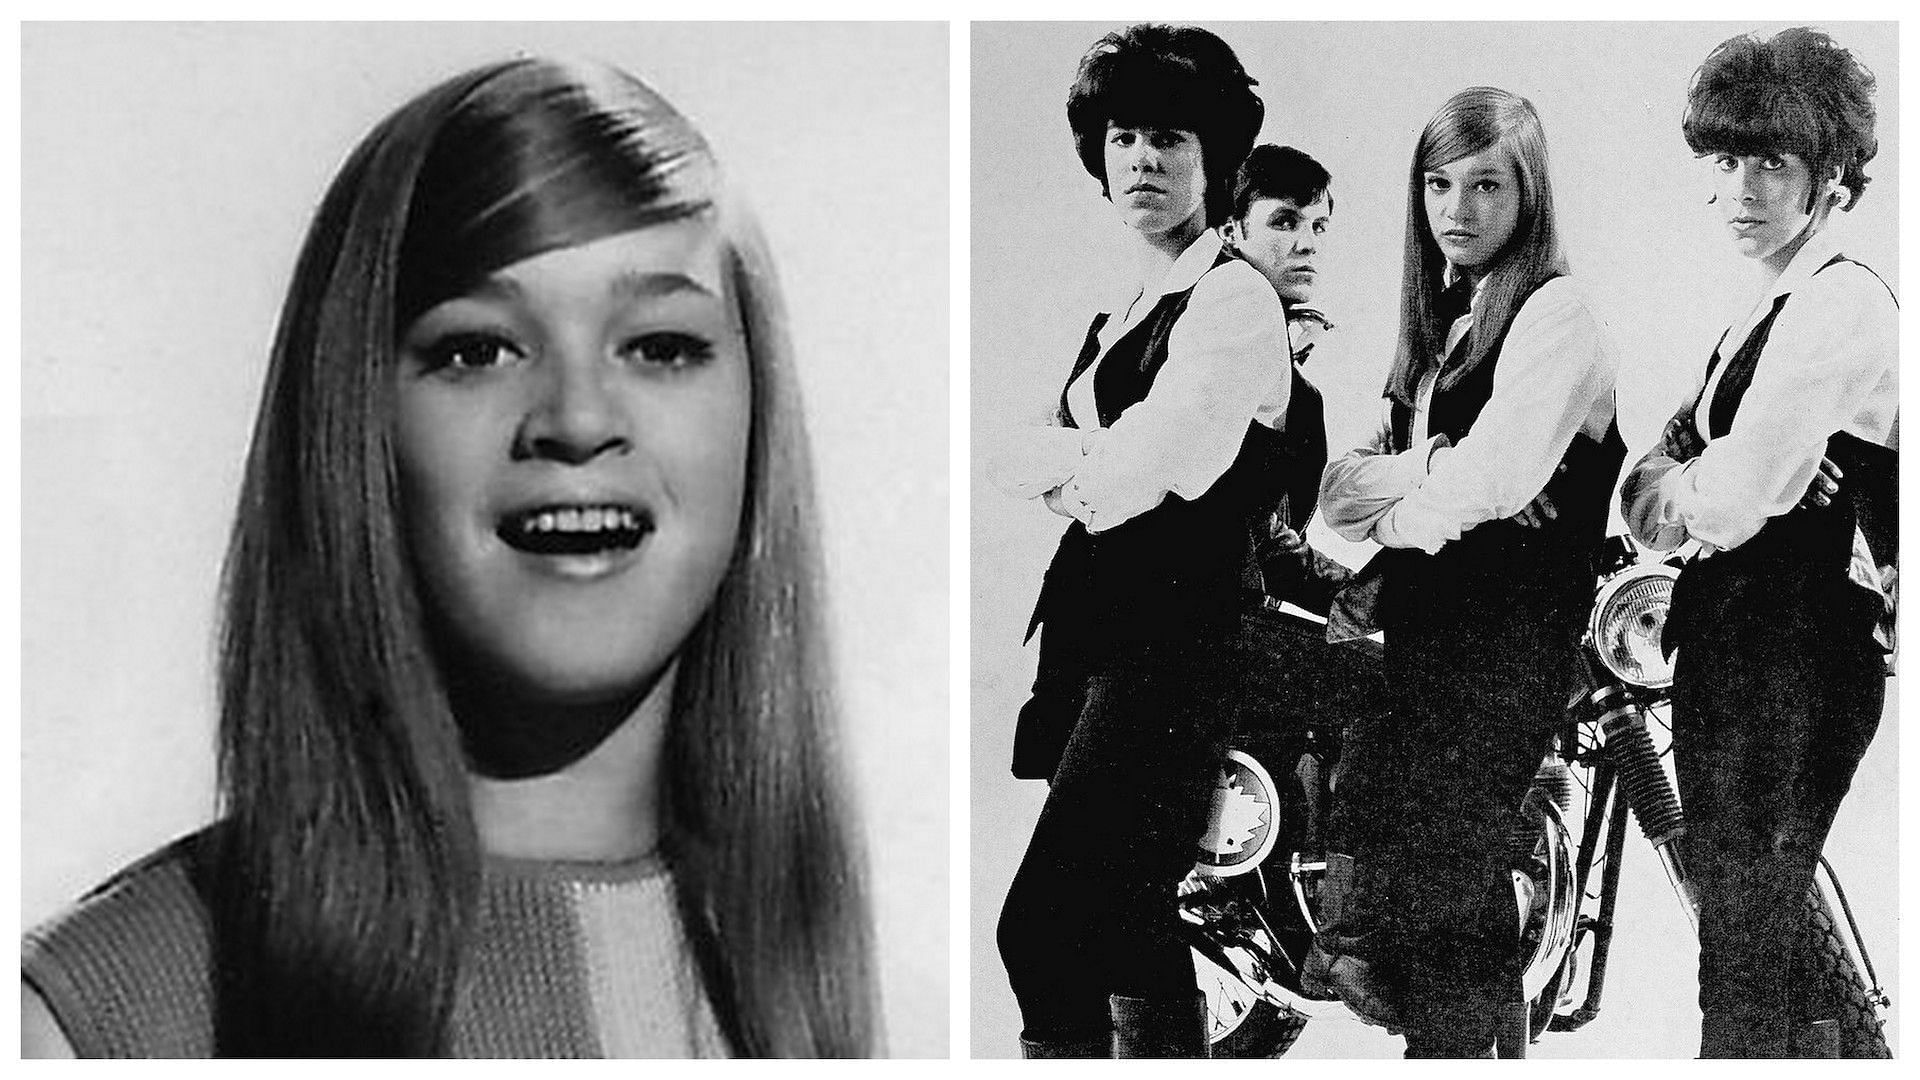 Mary Weiss and The Shangri-Las (Images via www.MaryWeiss.com)